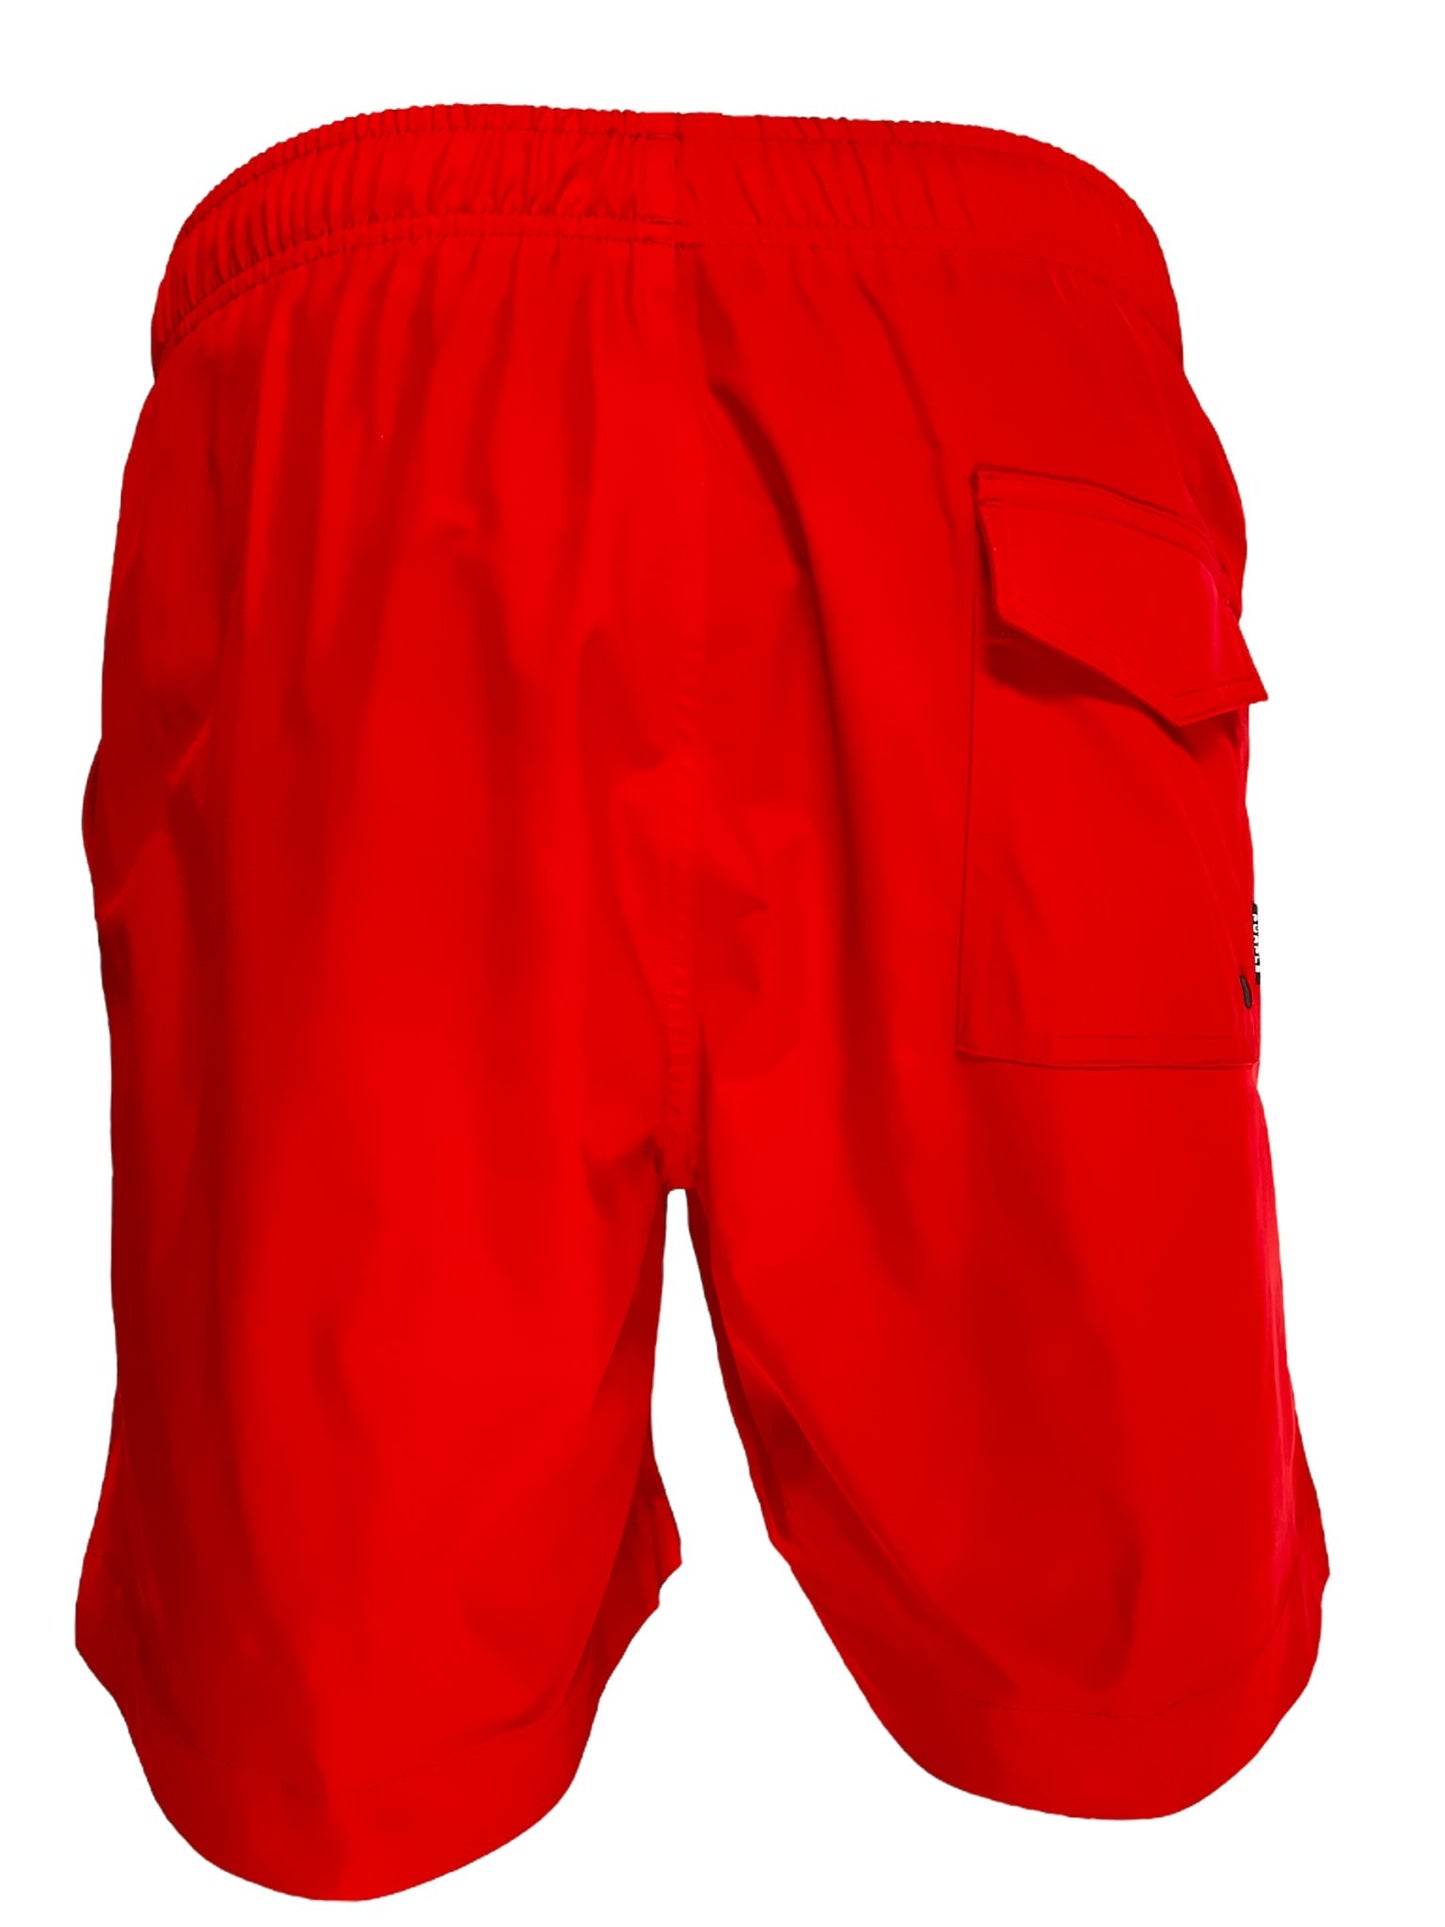 Purple Brand P504-PRUC All Round Short Red moisture-wicking swim shorts isolated on white background.